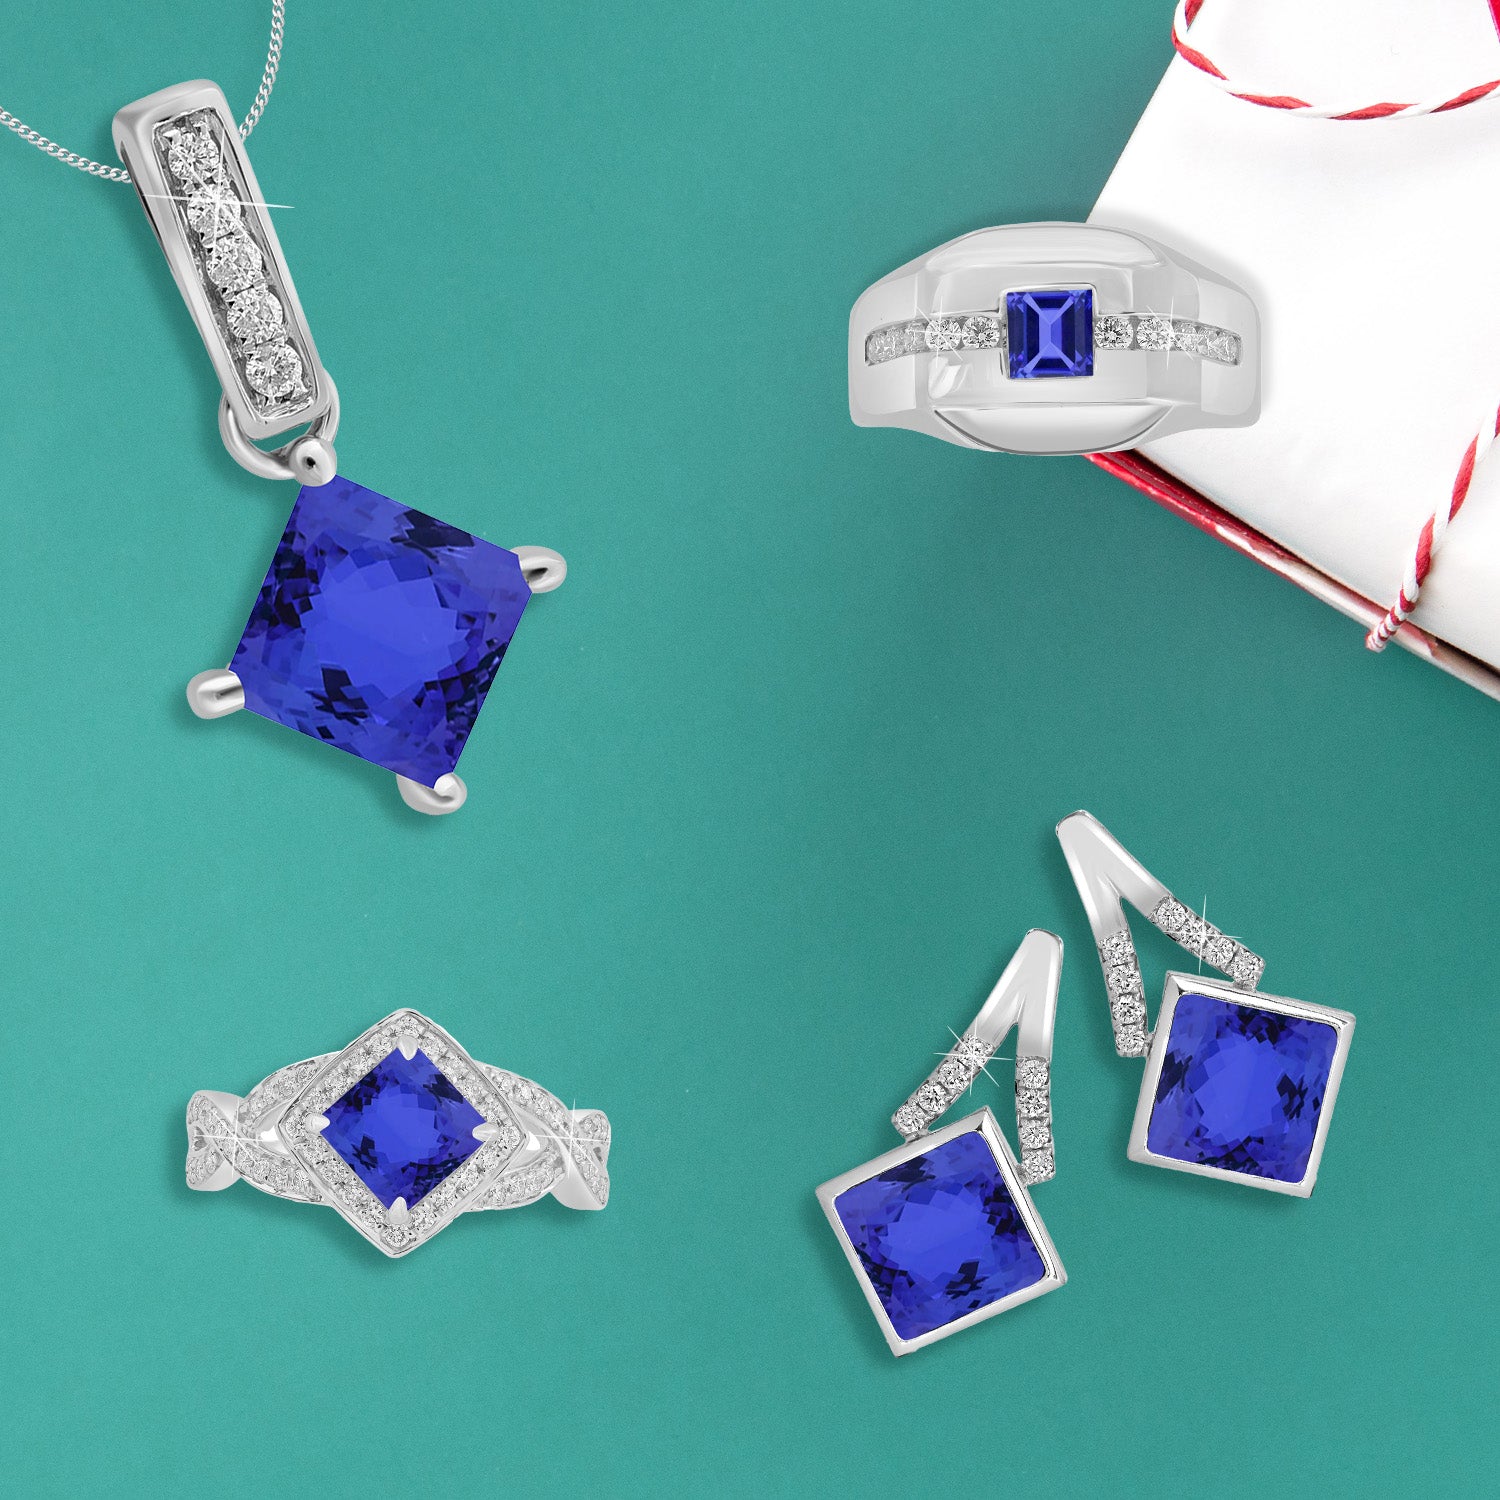 A guide to styling tanzanite for your New Year's Eve soirée